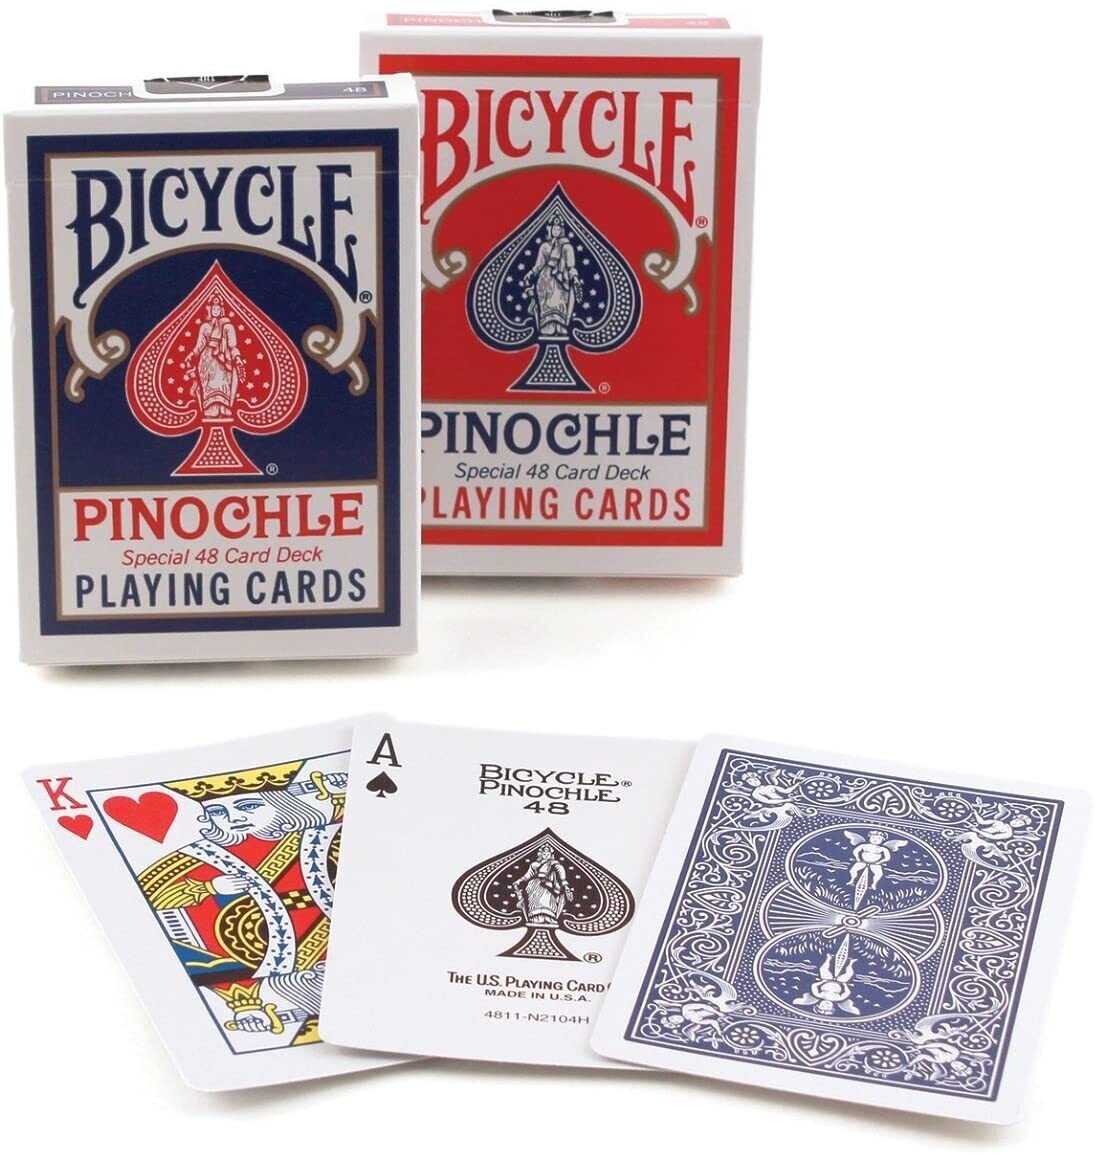 Bicycle Pinochle Playing cards 2ct (red and blue)